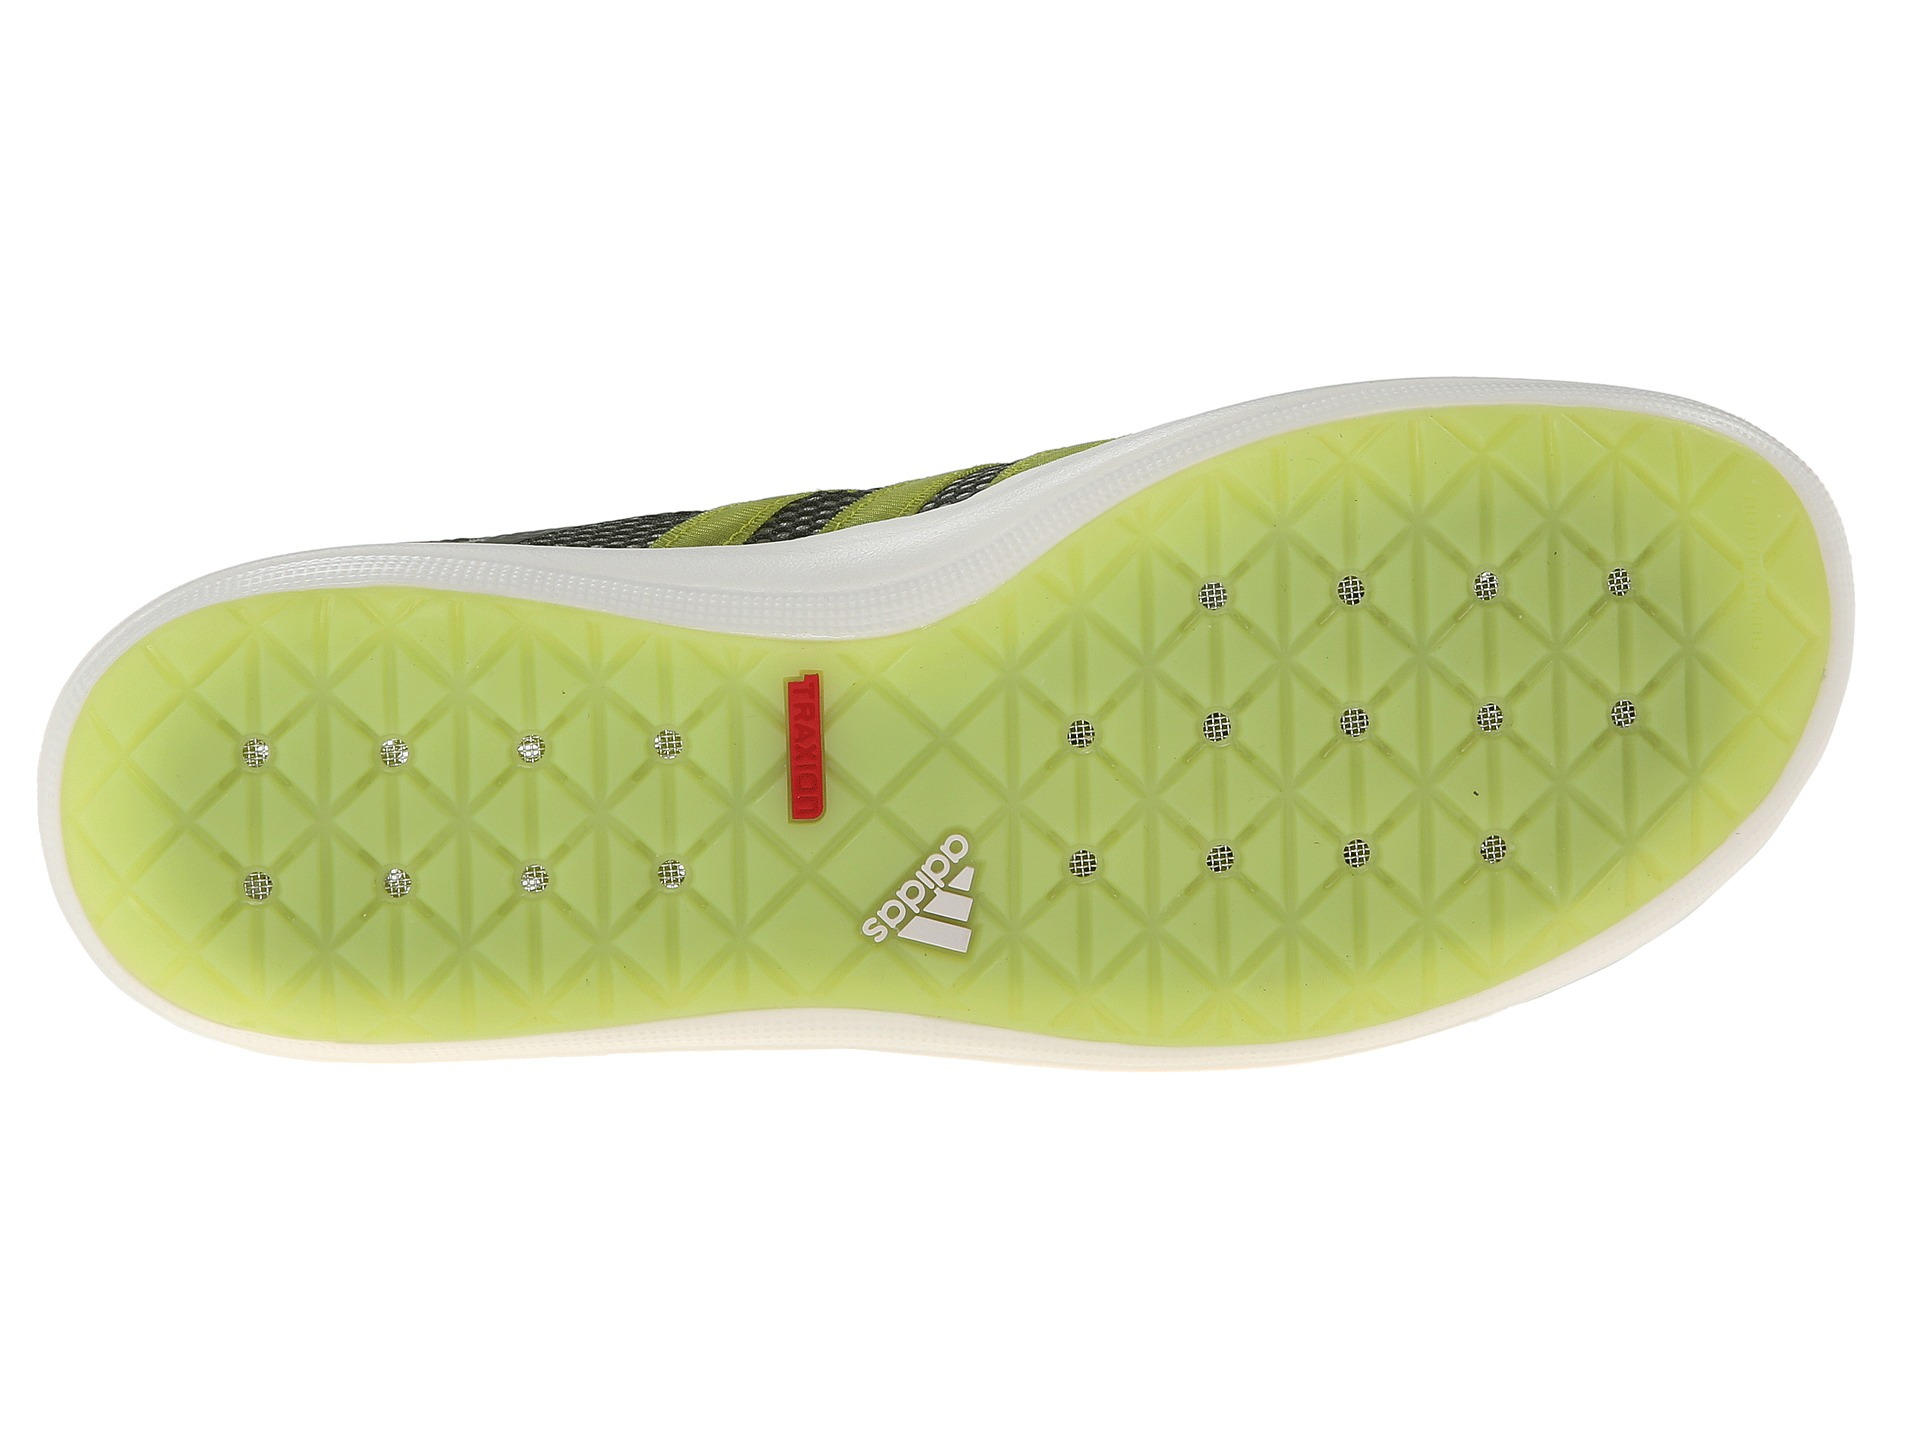 adidas Climacool® Boat Breeze in Green for Men - Lyst